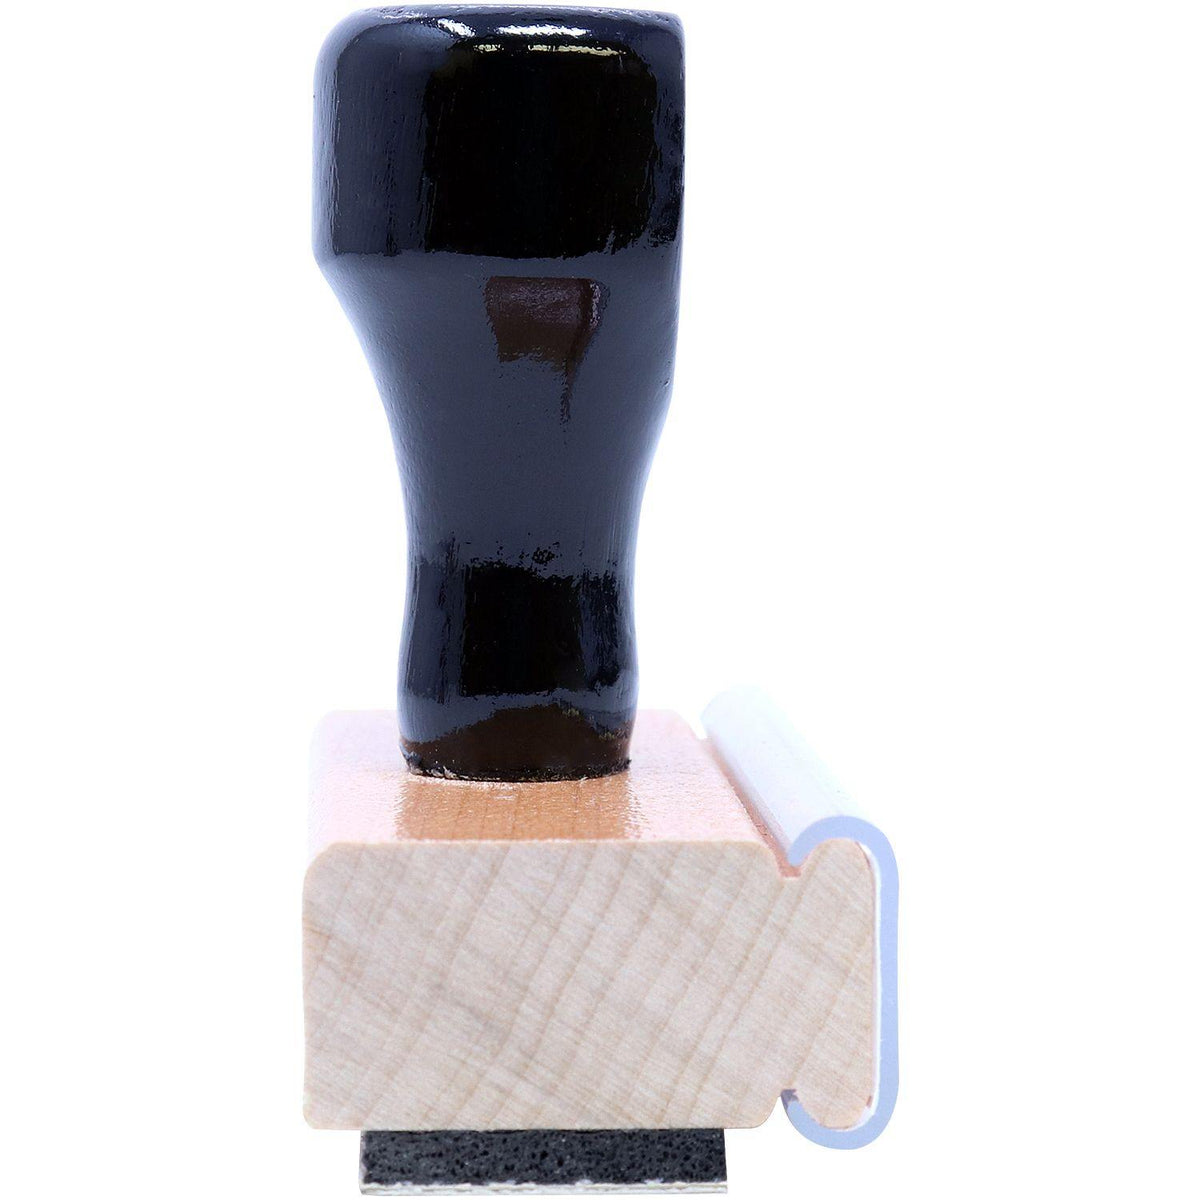 Side View of Large Received Without Contents Rubber Stamp